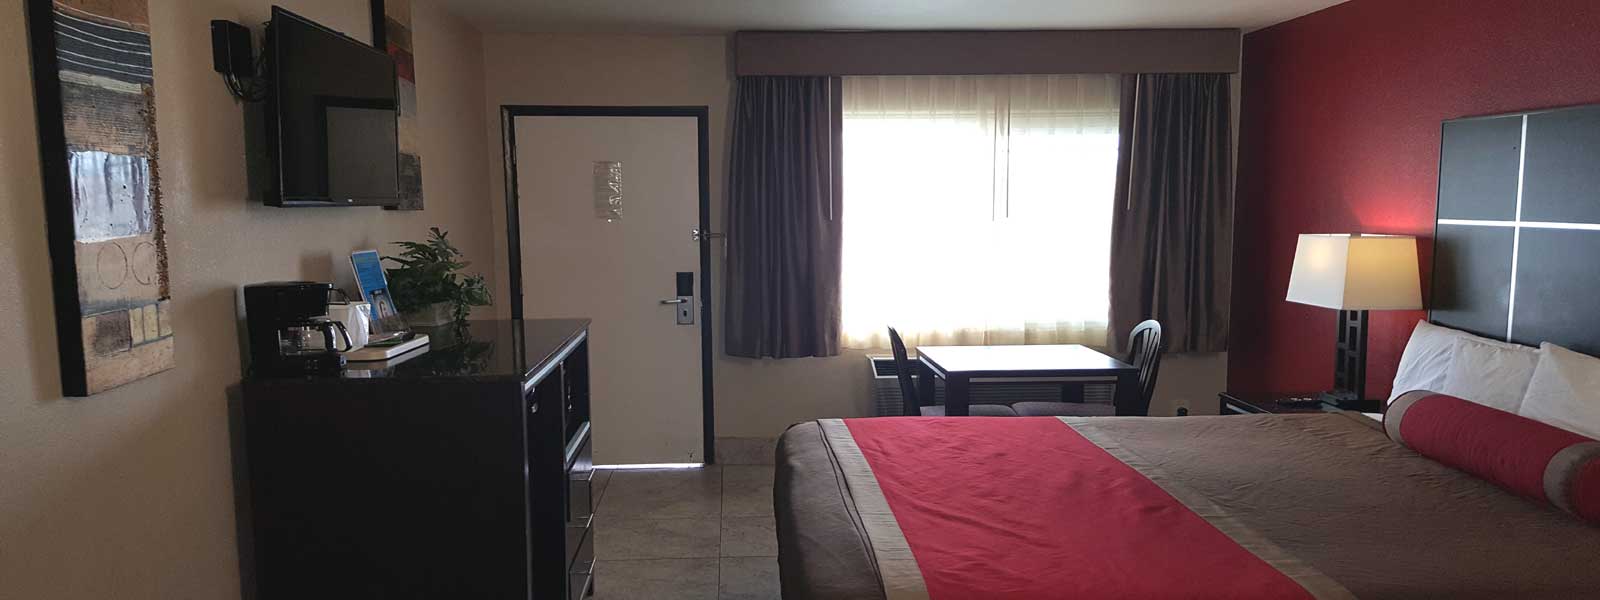 Harbor Inn and Suites Affordable Lodging in Oceanside California Clean